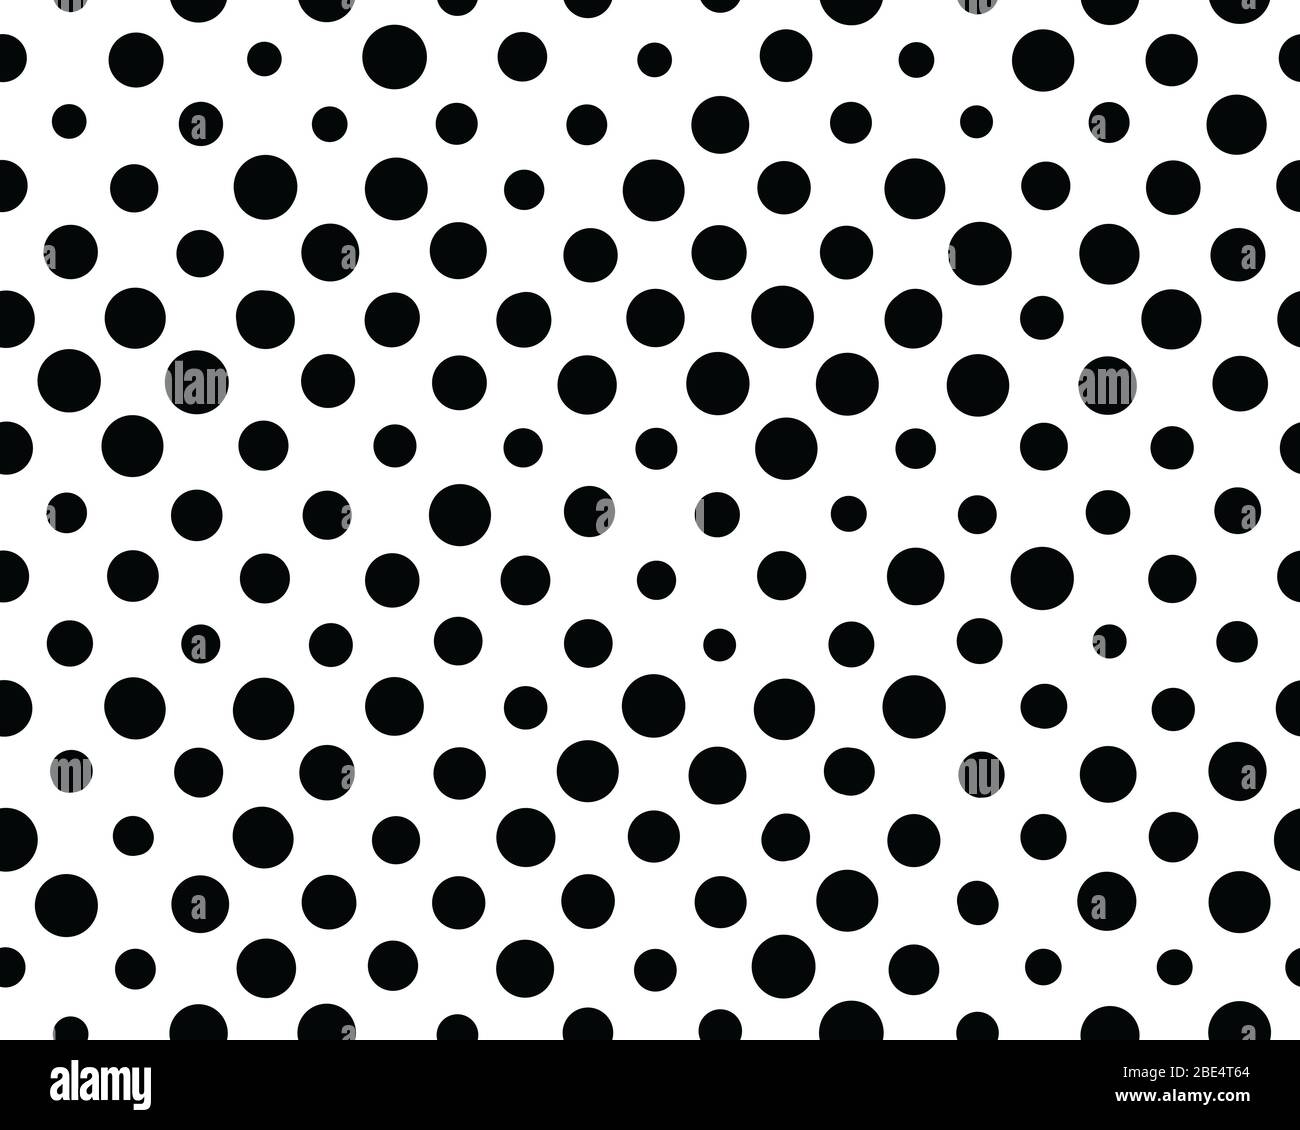 Seamless pattern of circles on a white background Stock Photo